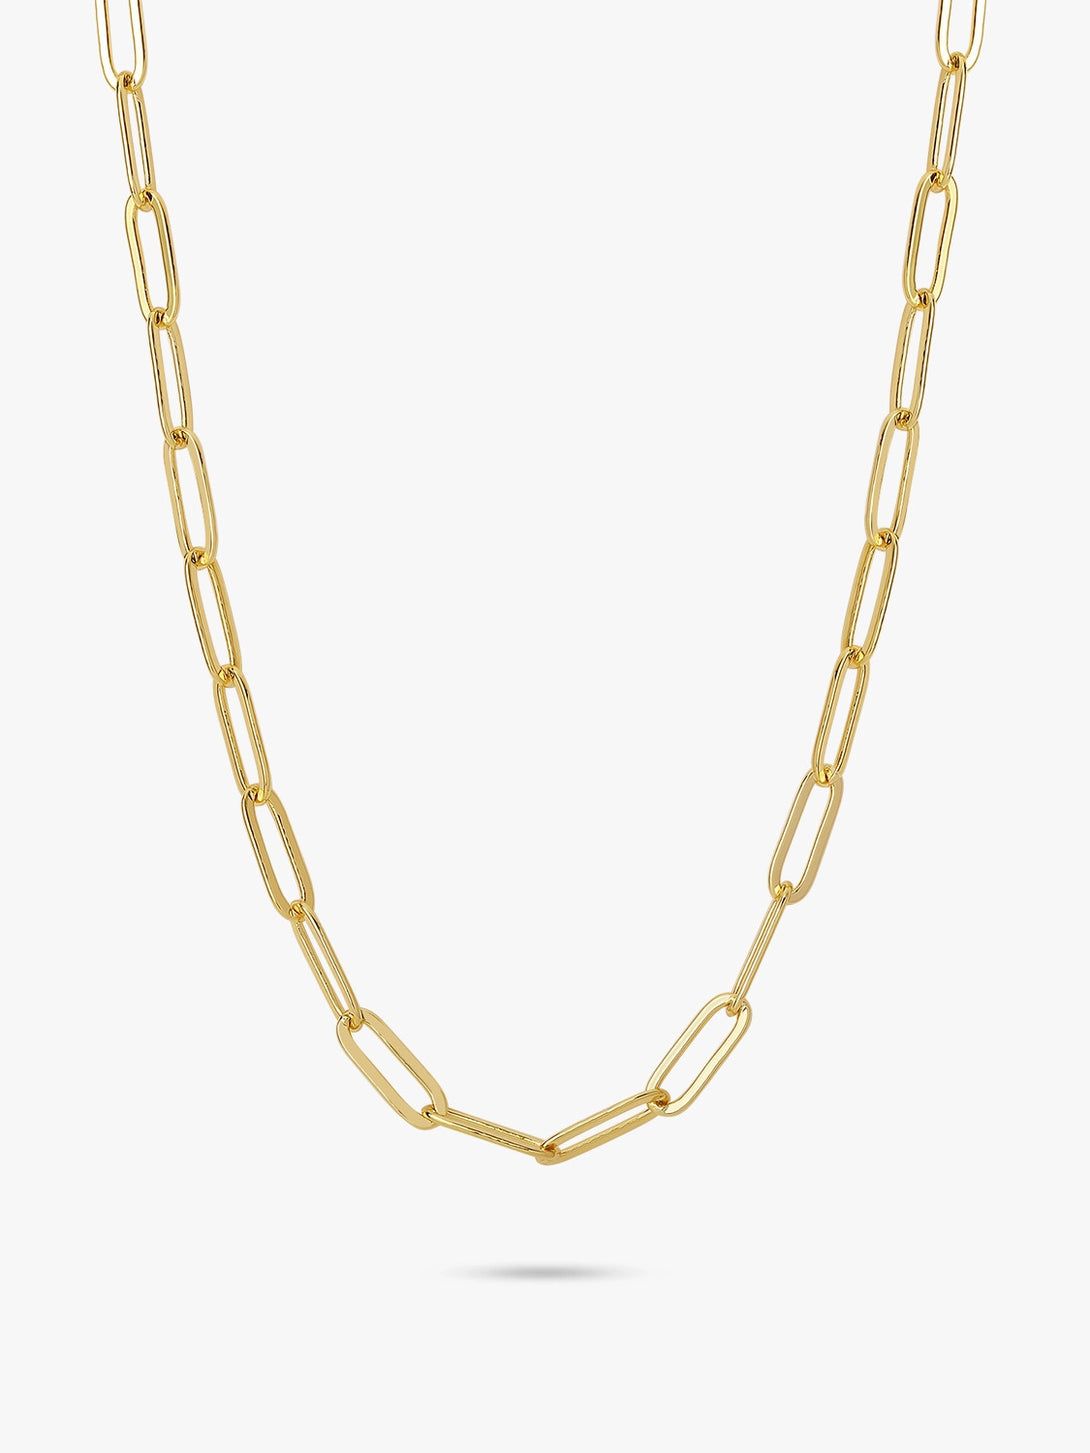 Unisex Bold Chain Necklace - OOTDY